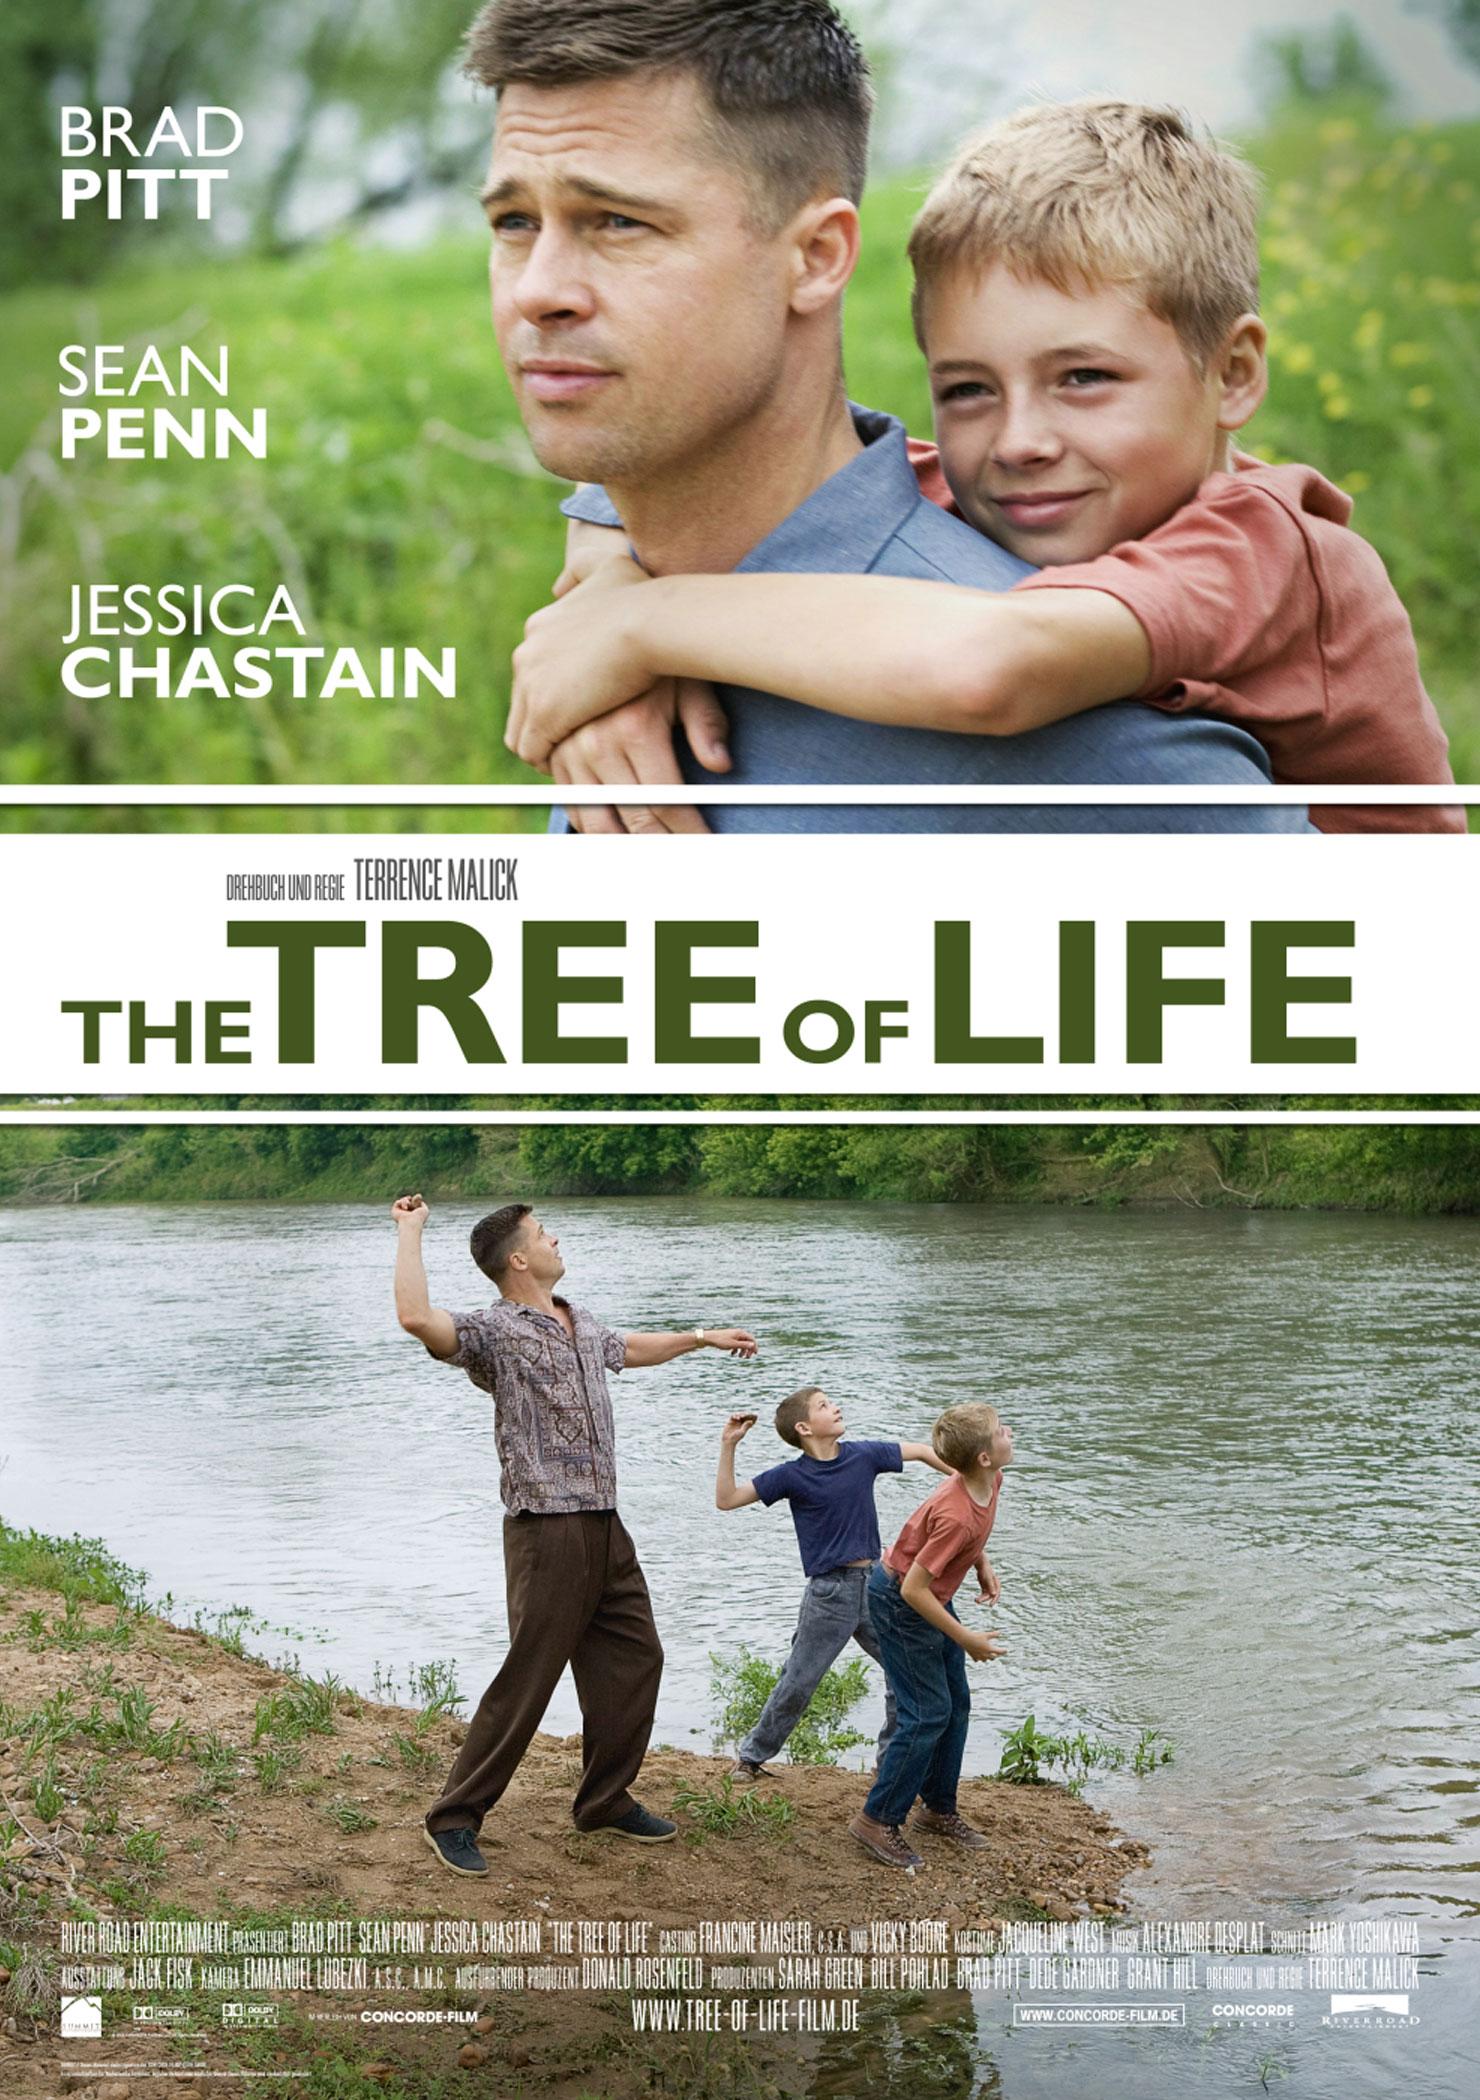 The Tree of Life (Poster)